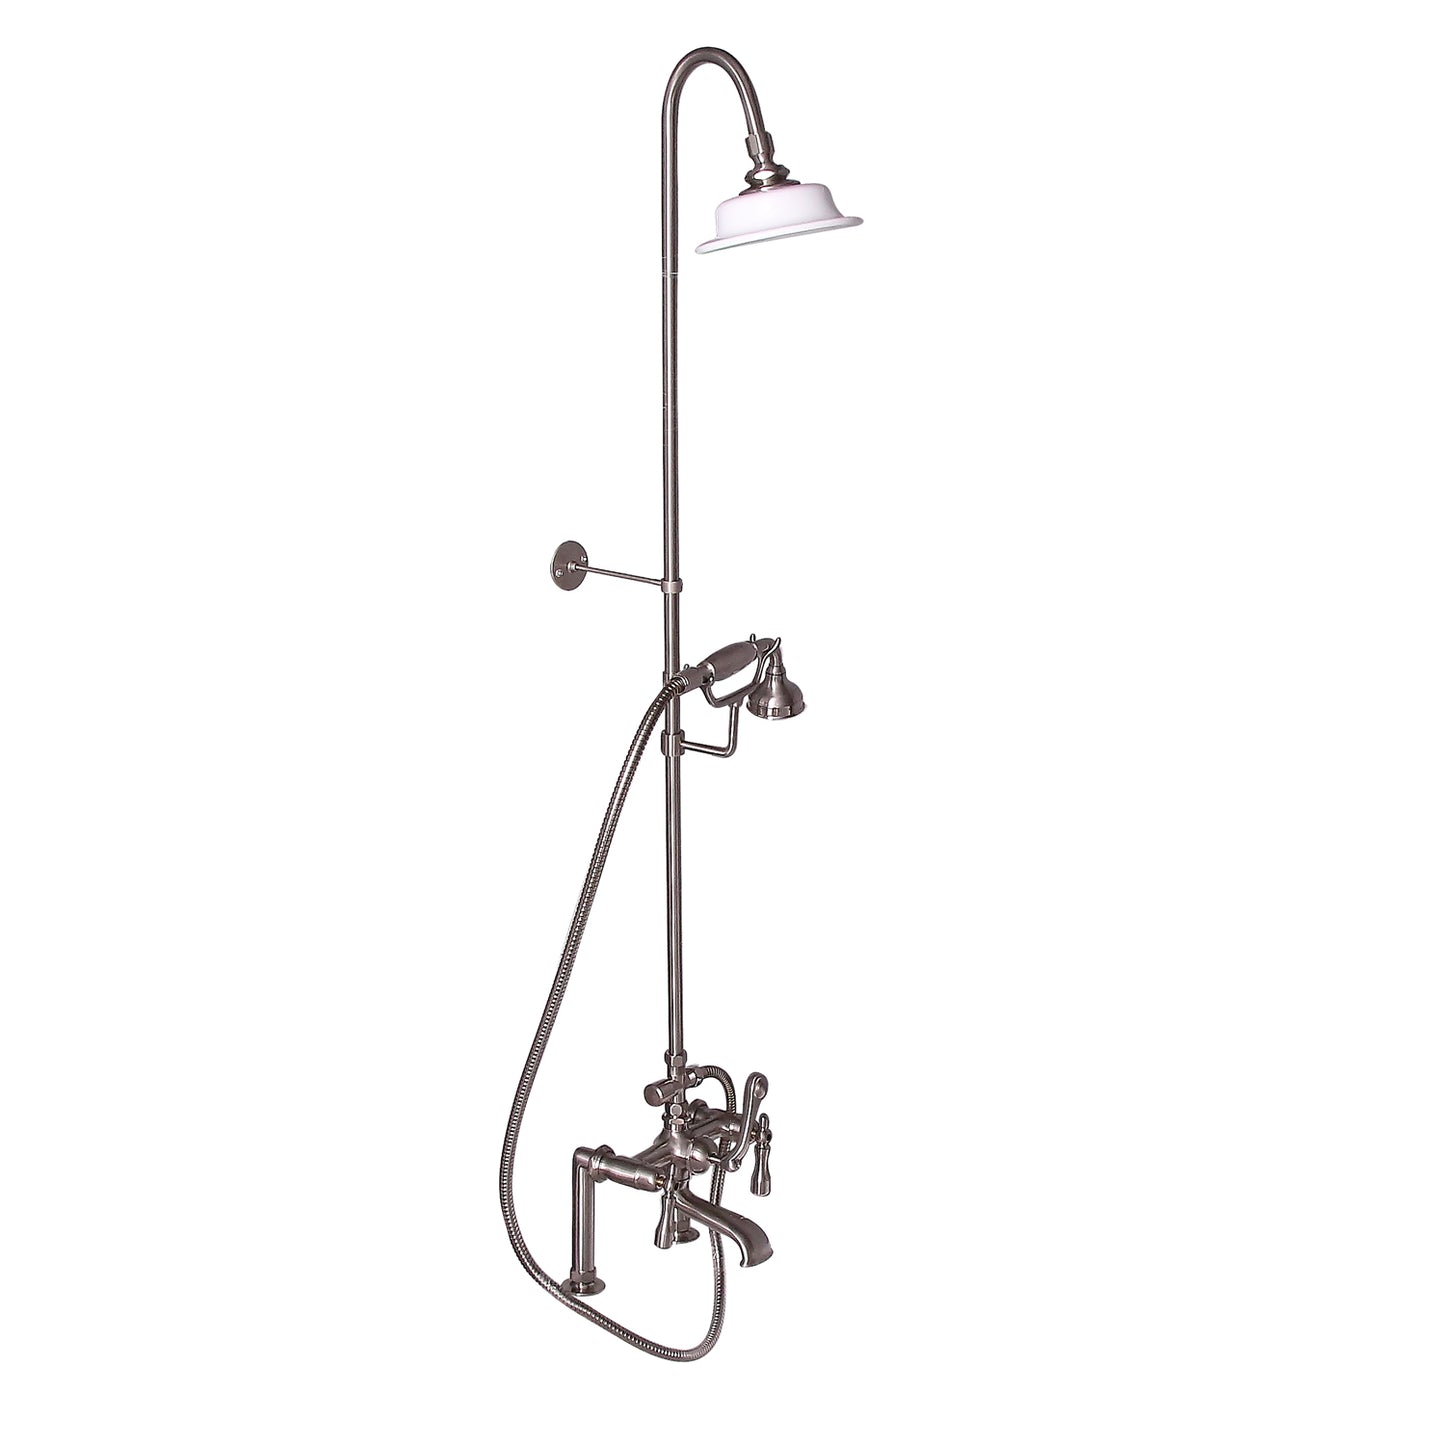 Tub Faucet Kit with 62" Riser, Shower Head, Hand Shower, Lever Handles in Brushed Nickel